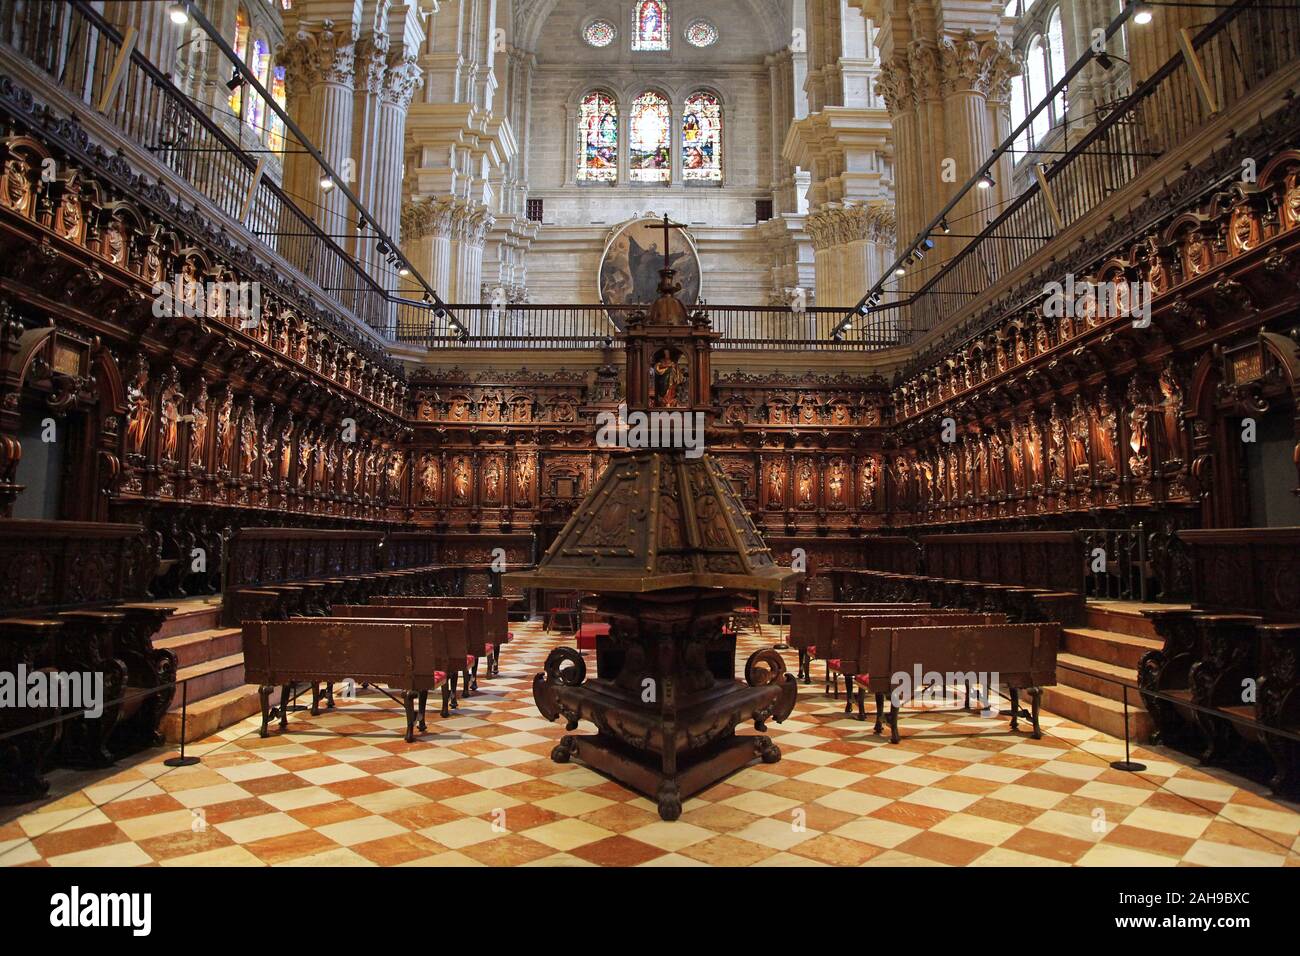 The Choir at Interior of the Cathedral of Our Lady of Incarnation / 'the Cathedral' in the city centre Malaga Costa del Sol Andalucia Spain Stock Photo